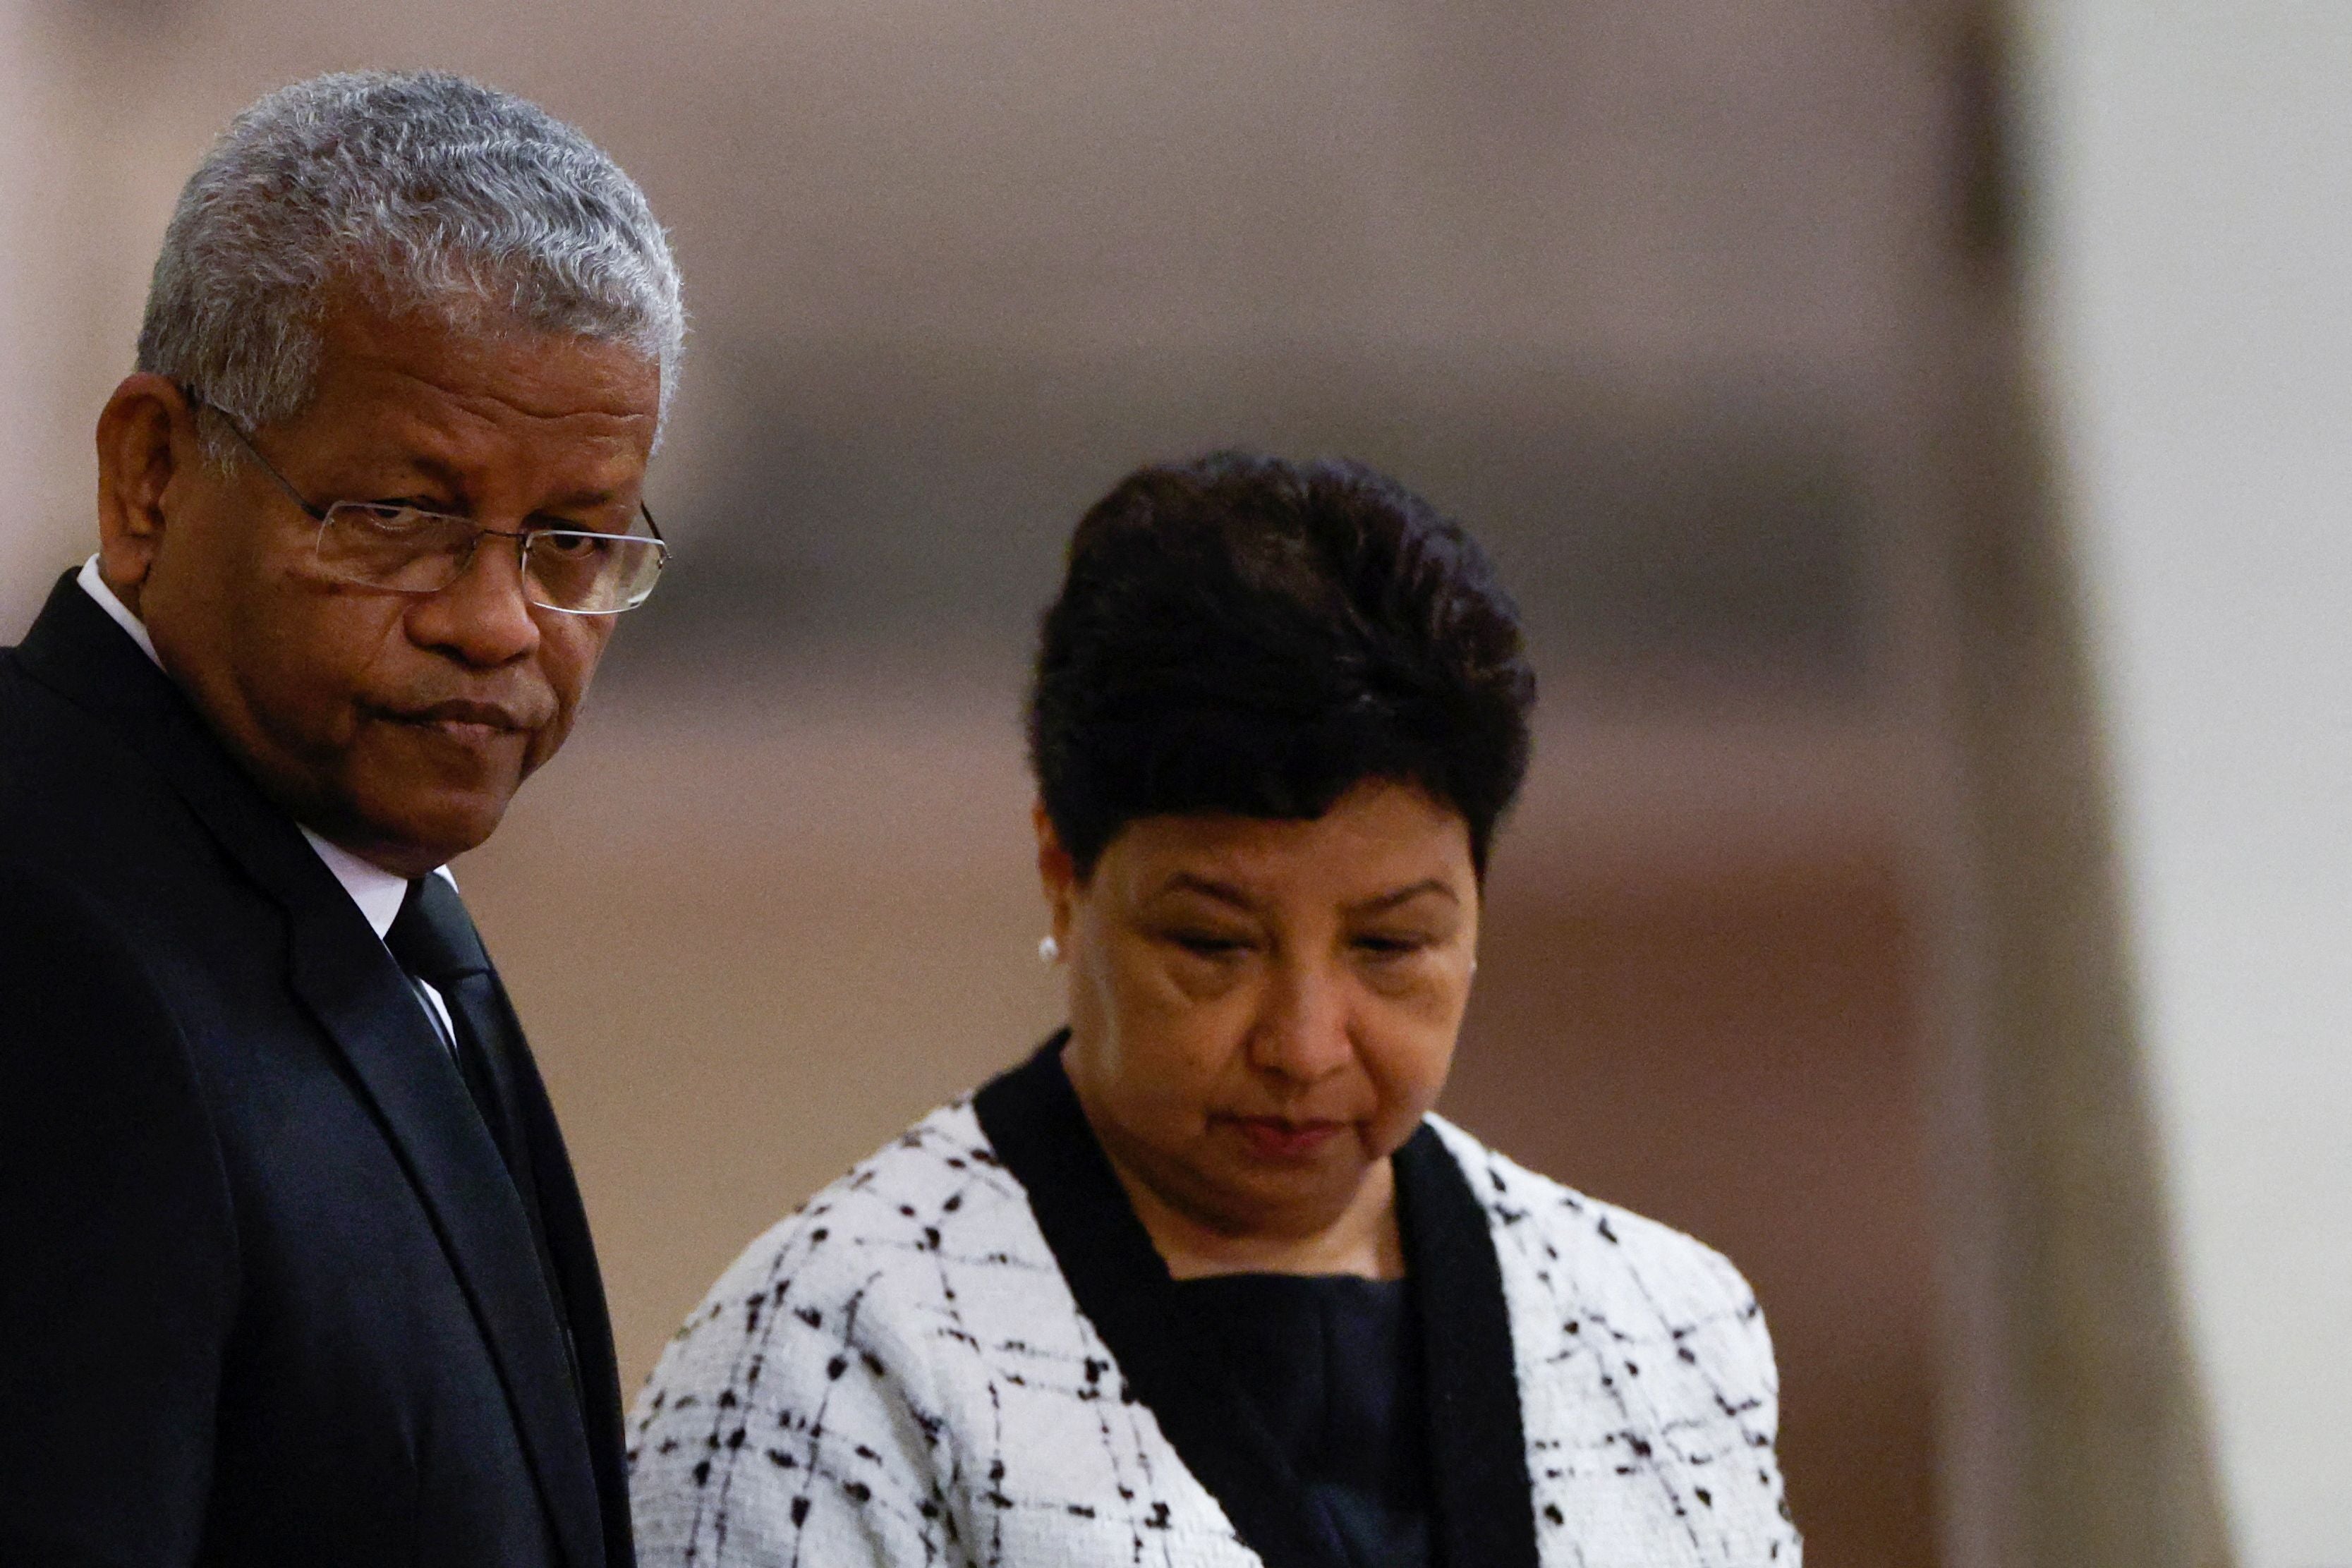 Seychelles President Wavel Ramkalawan (L) and his wife Linda Ramkalawan pay their respects to the Queen’s coffin